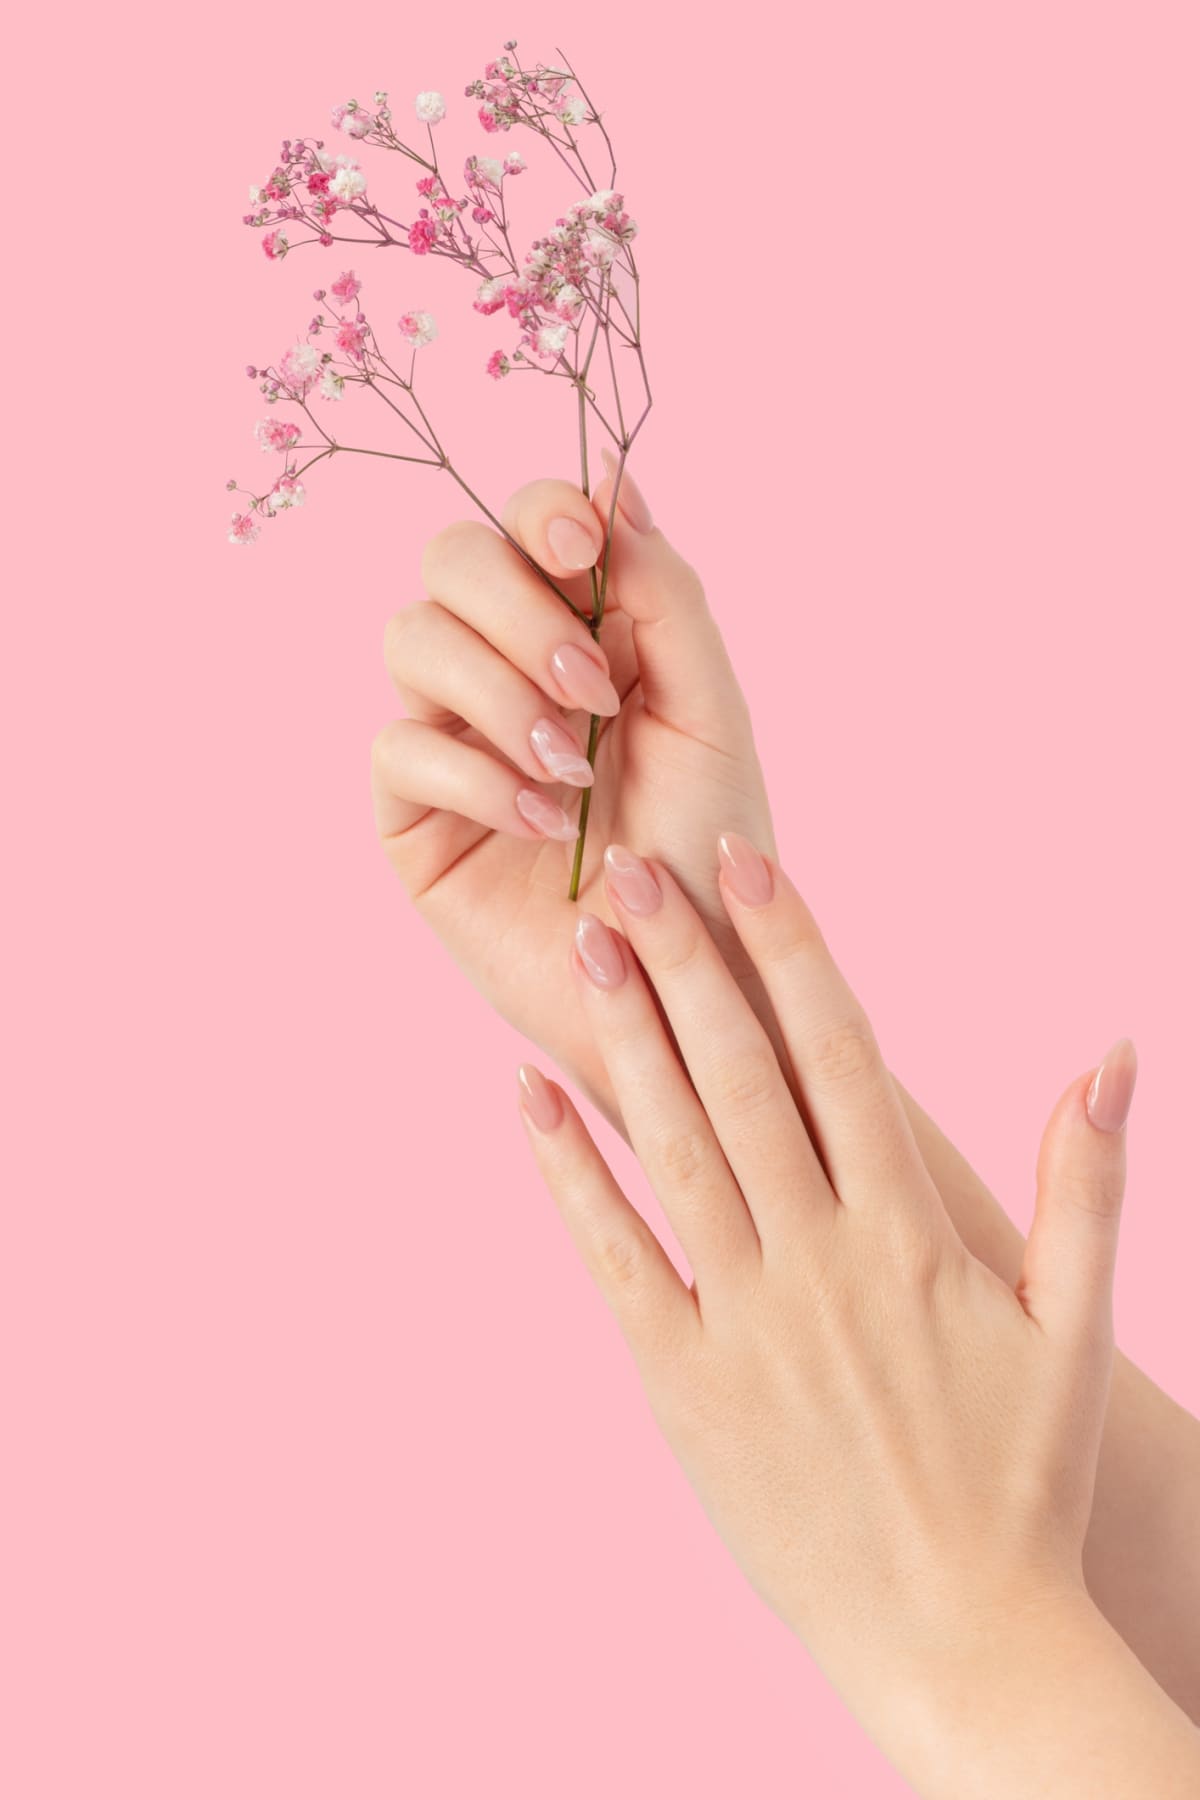 Female two hands with pink gypsophila flowers gel polish beige long nails on a pink isolated background. Beauty spa concept, manicure marble design